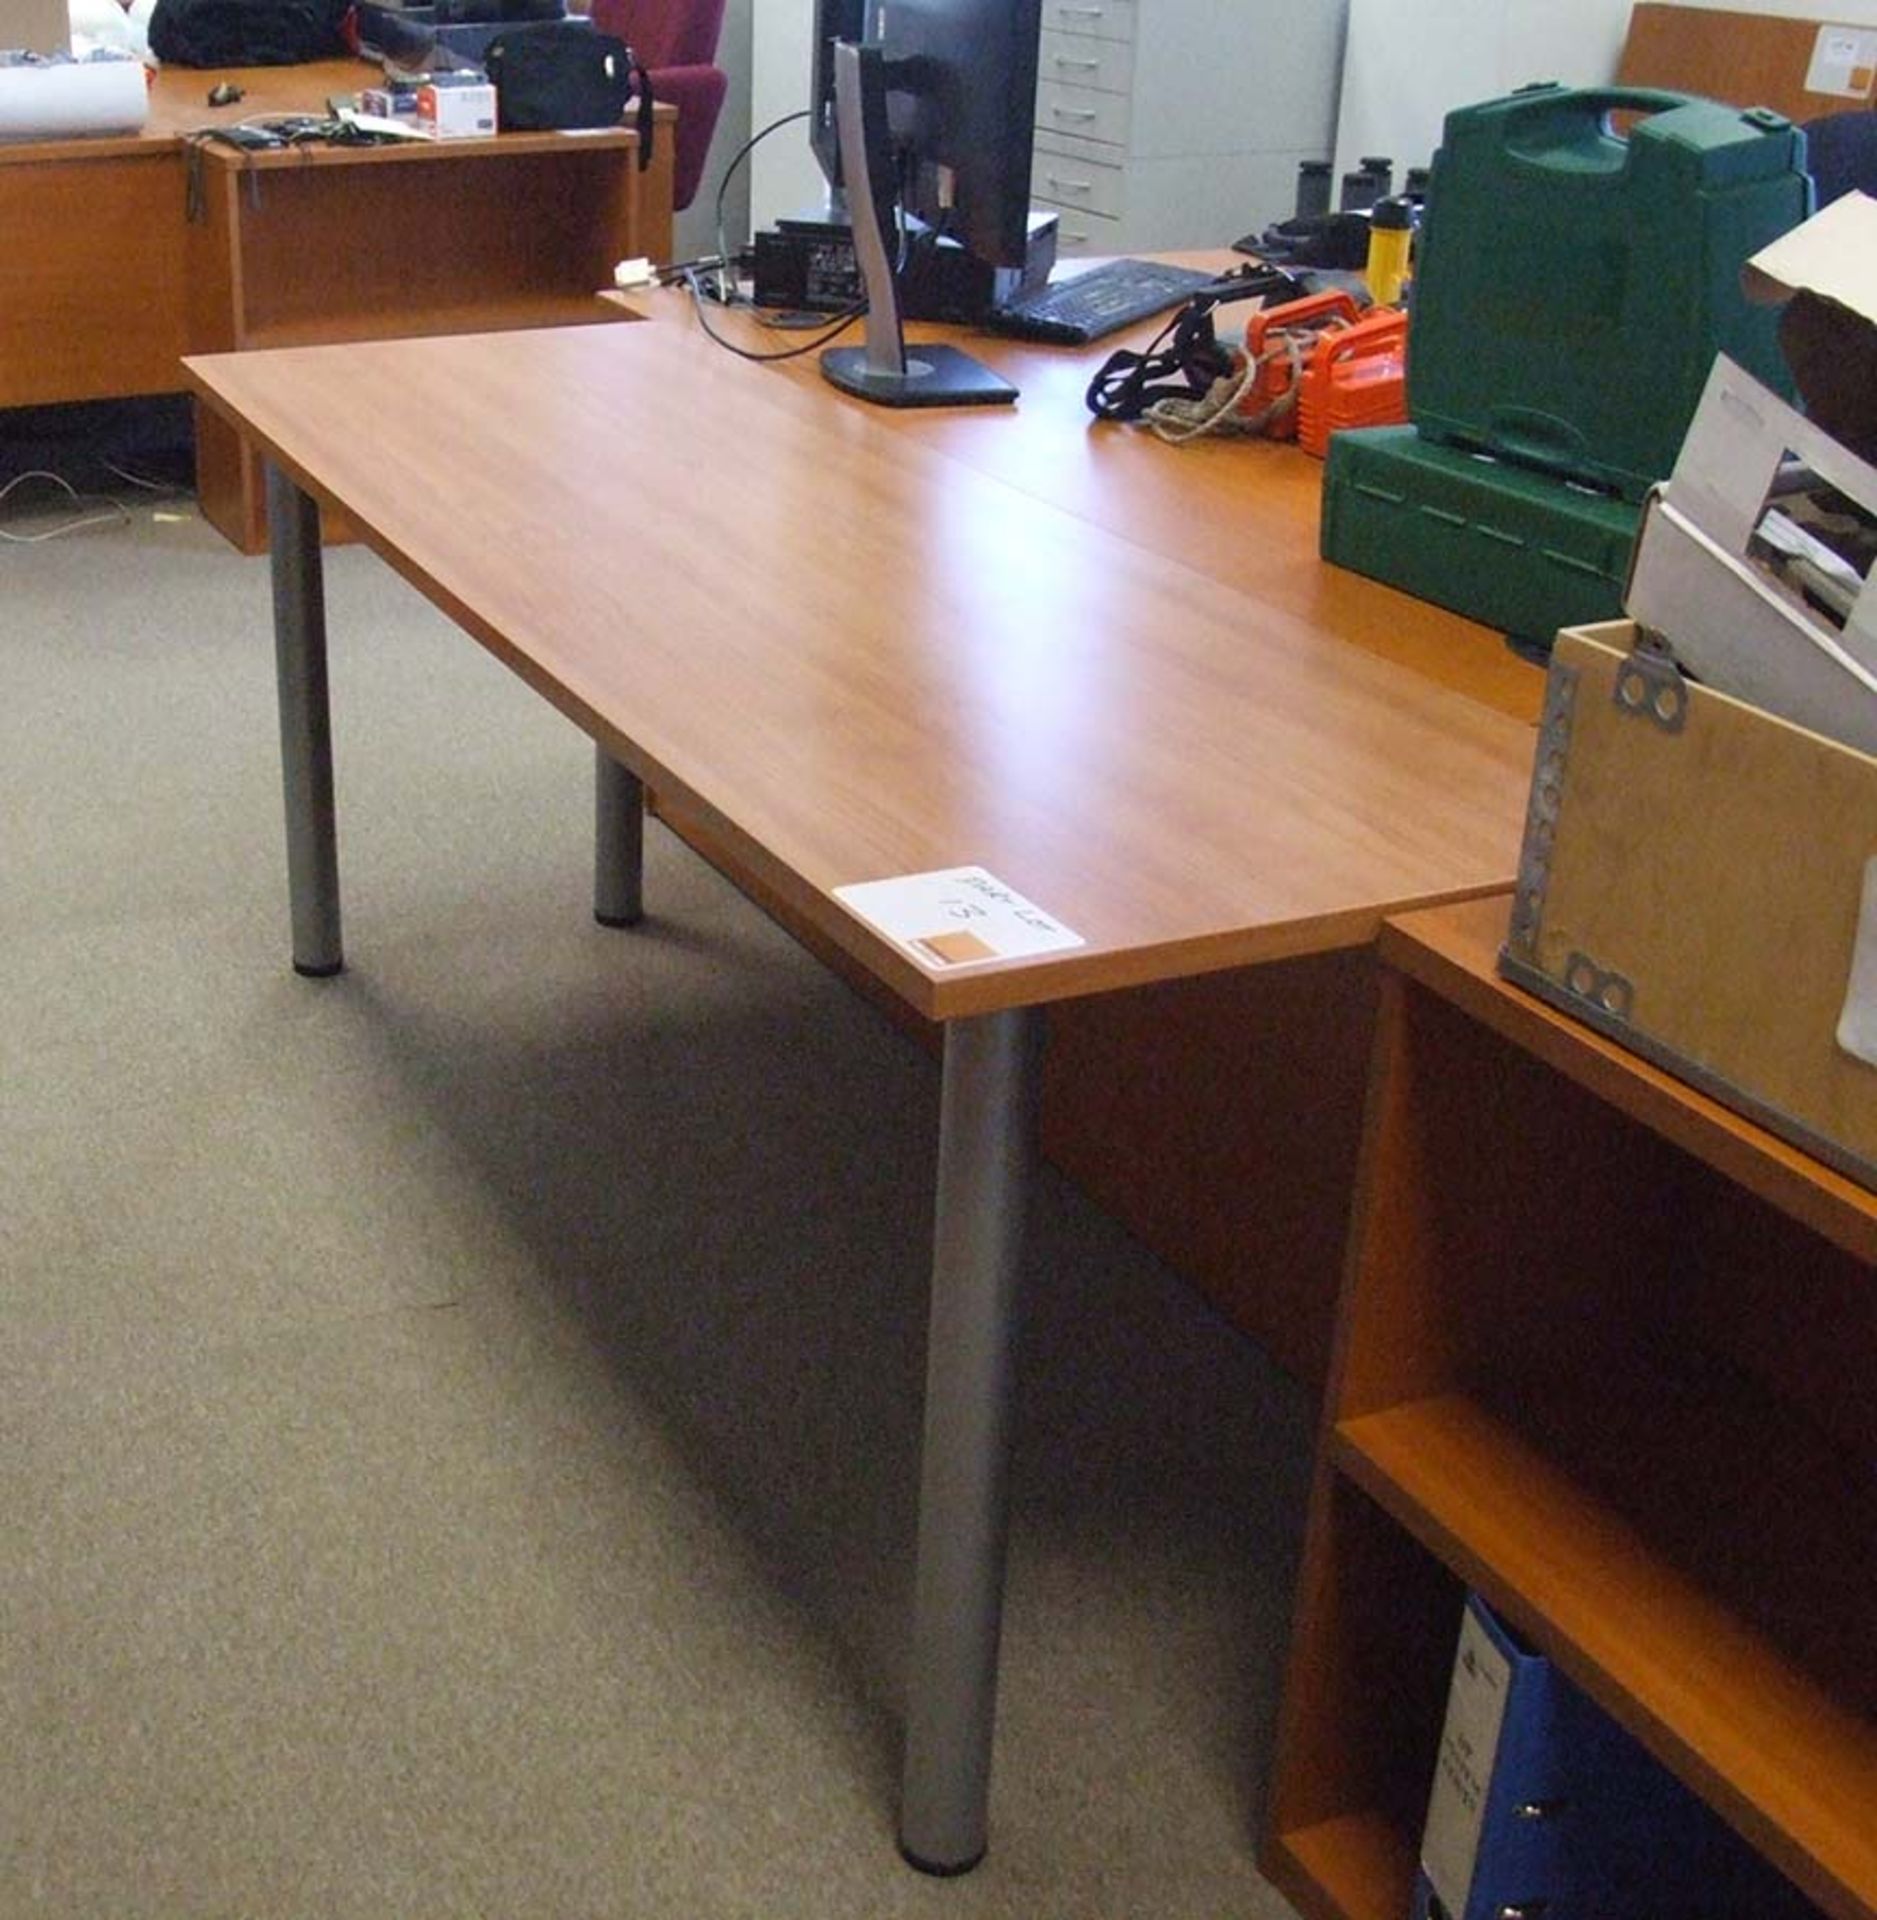 Office Tables 1800 x 600 and 1200 x 600